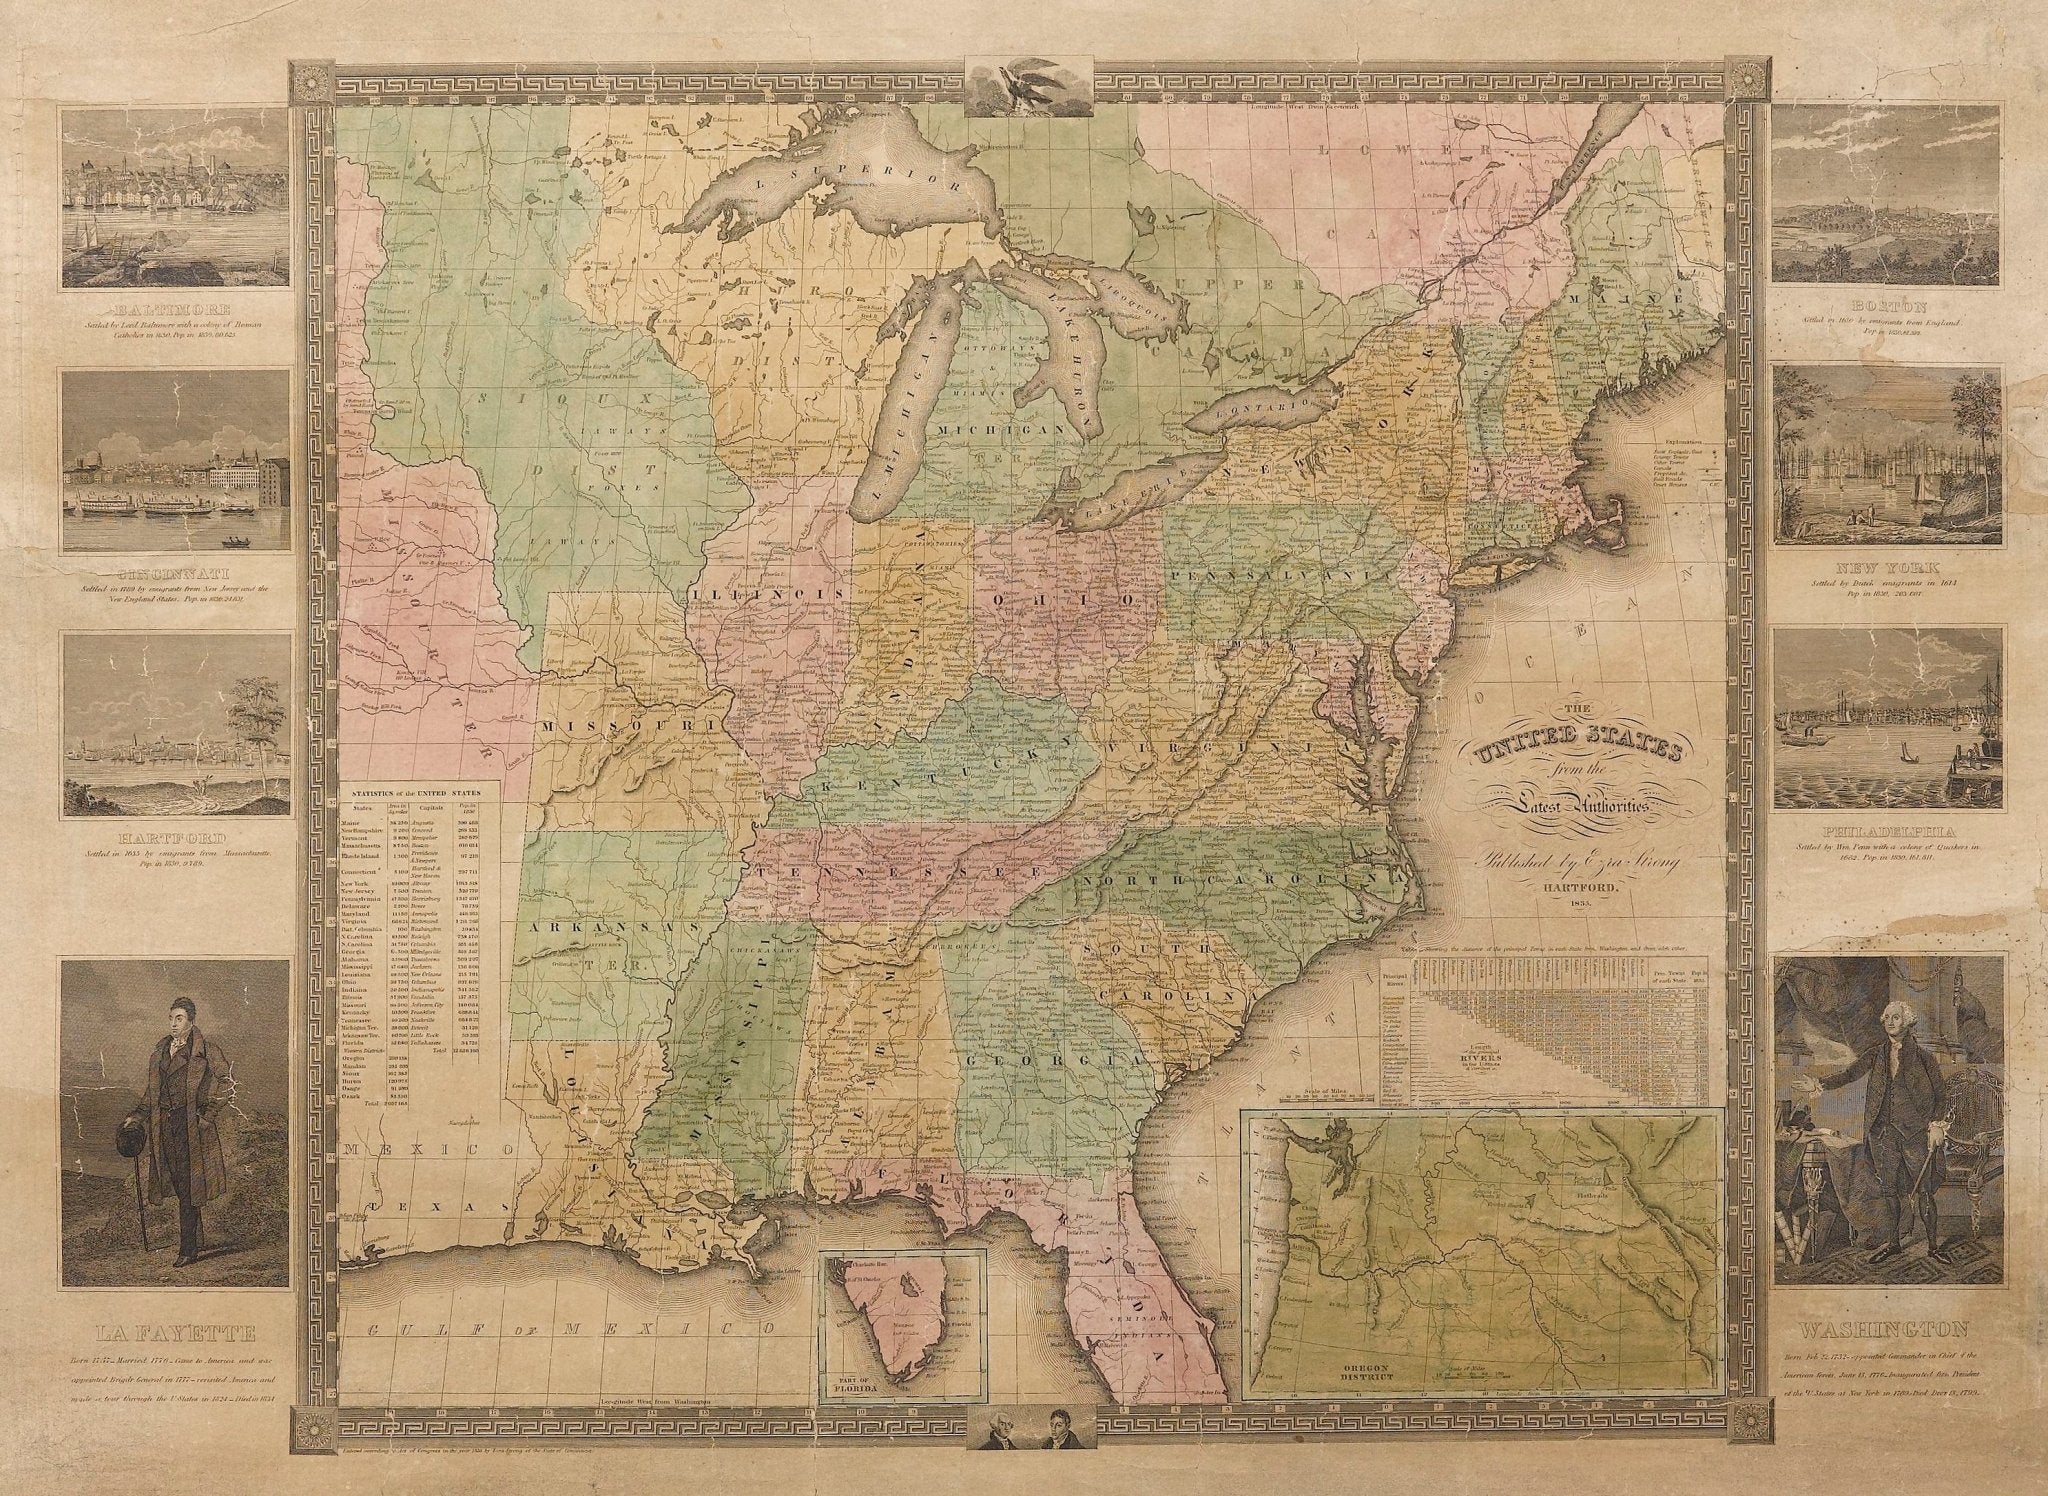 1835 "The United States from the Latest Authorities" Hanging Wall Map by Ezra Strong - The Great Republic